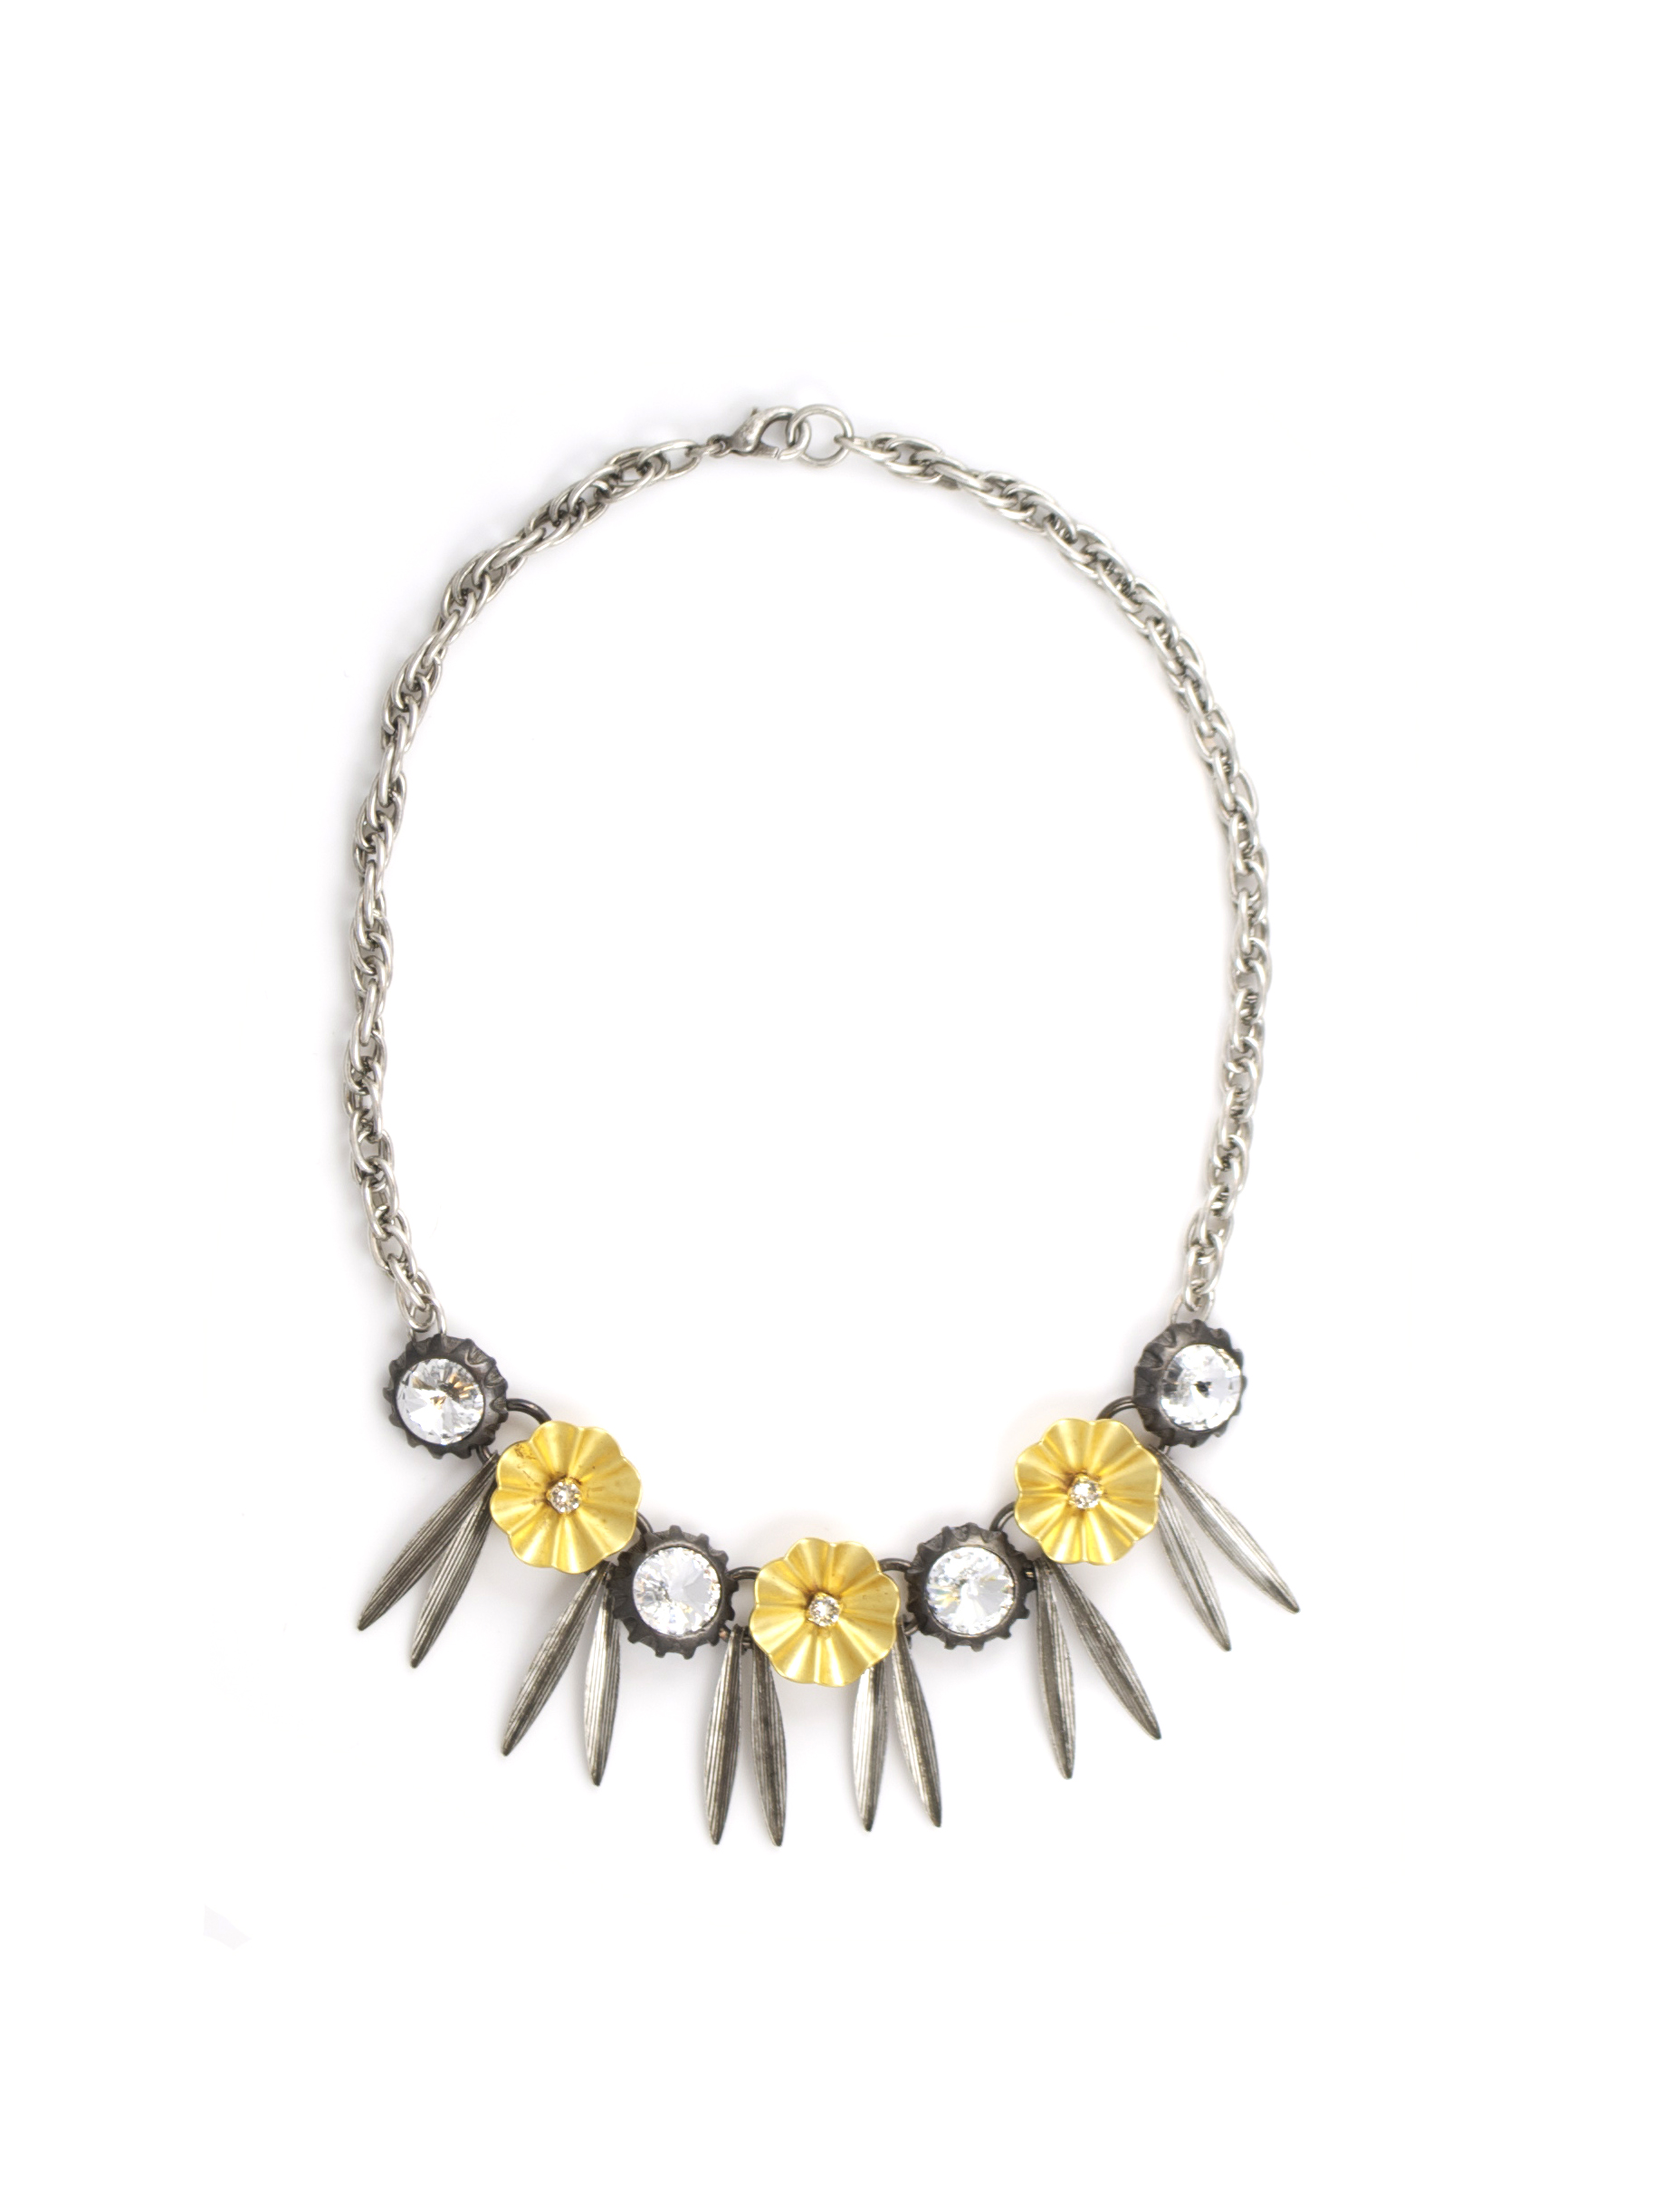  Flower Shower necklace, available at  Gerard Yosca .&nbsp; 